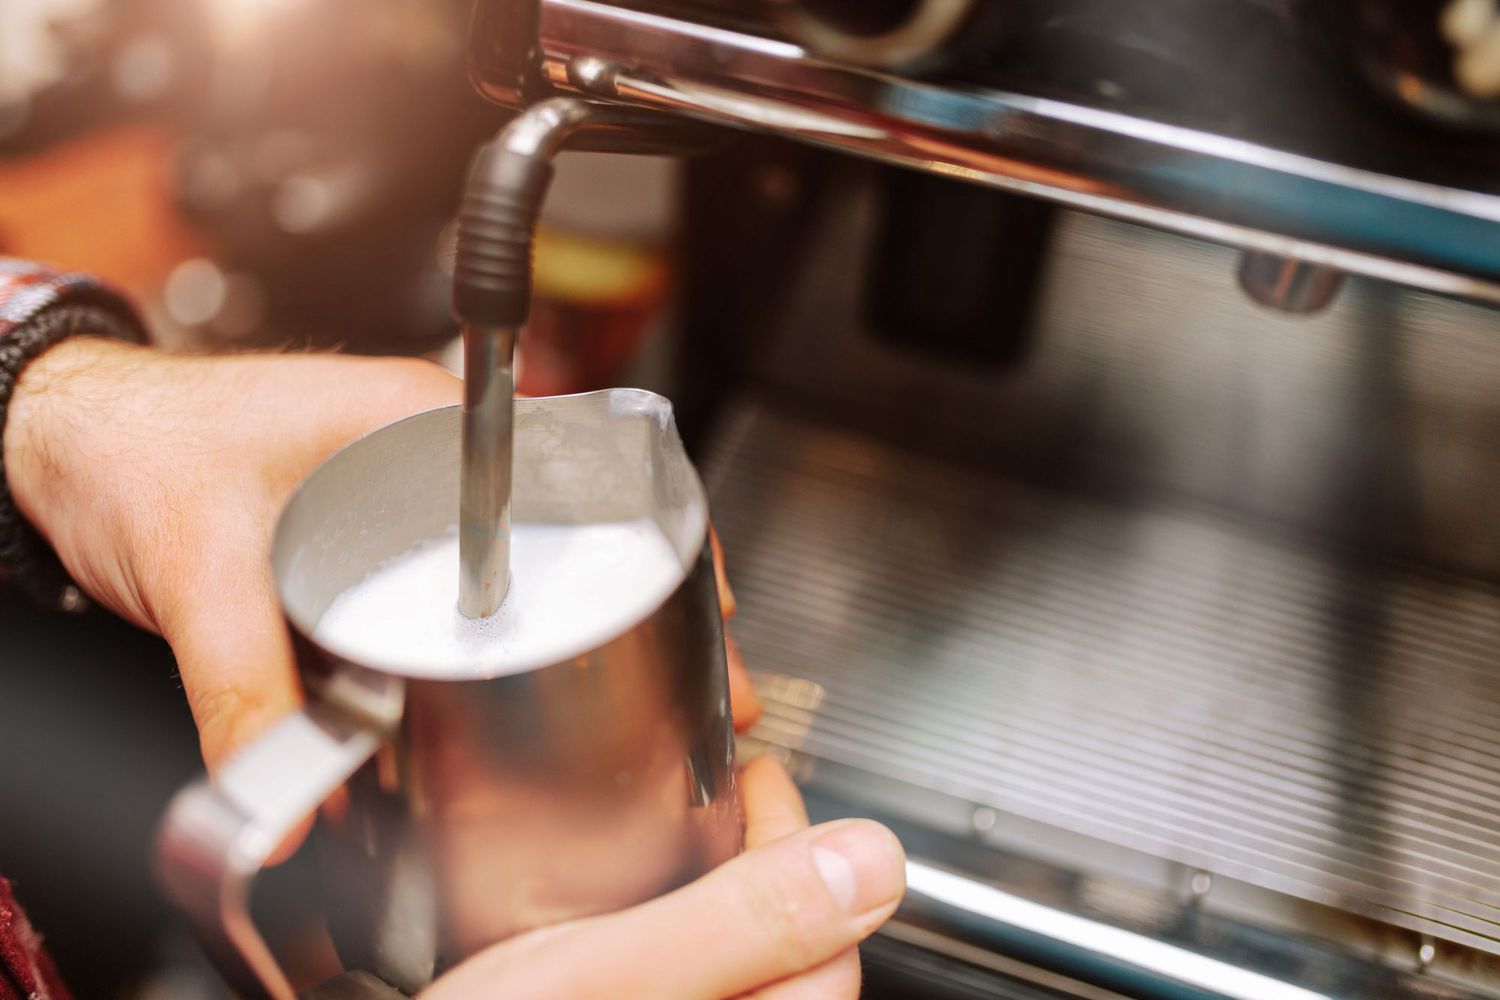 person using wand on espresso machine to froth milk or cream